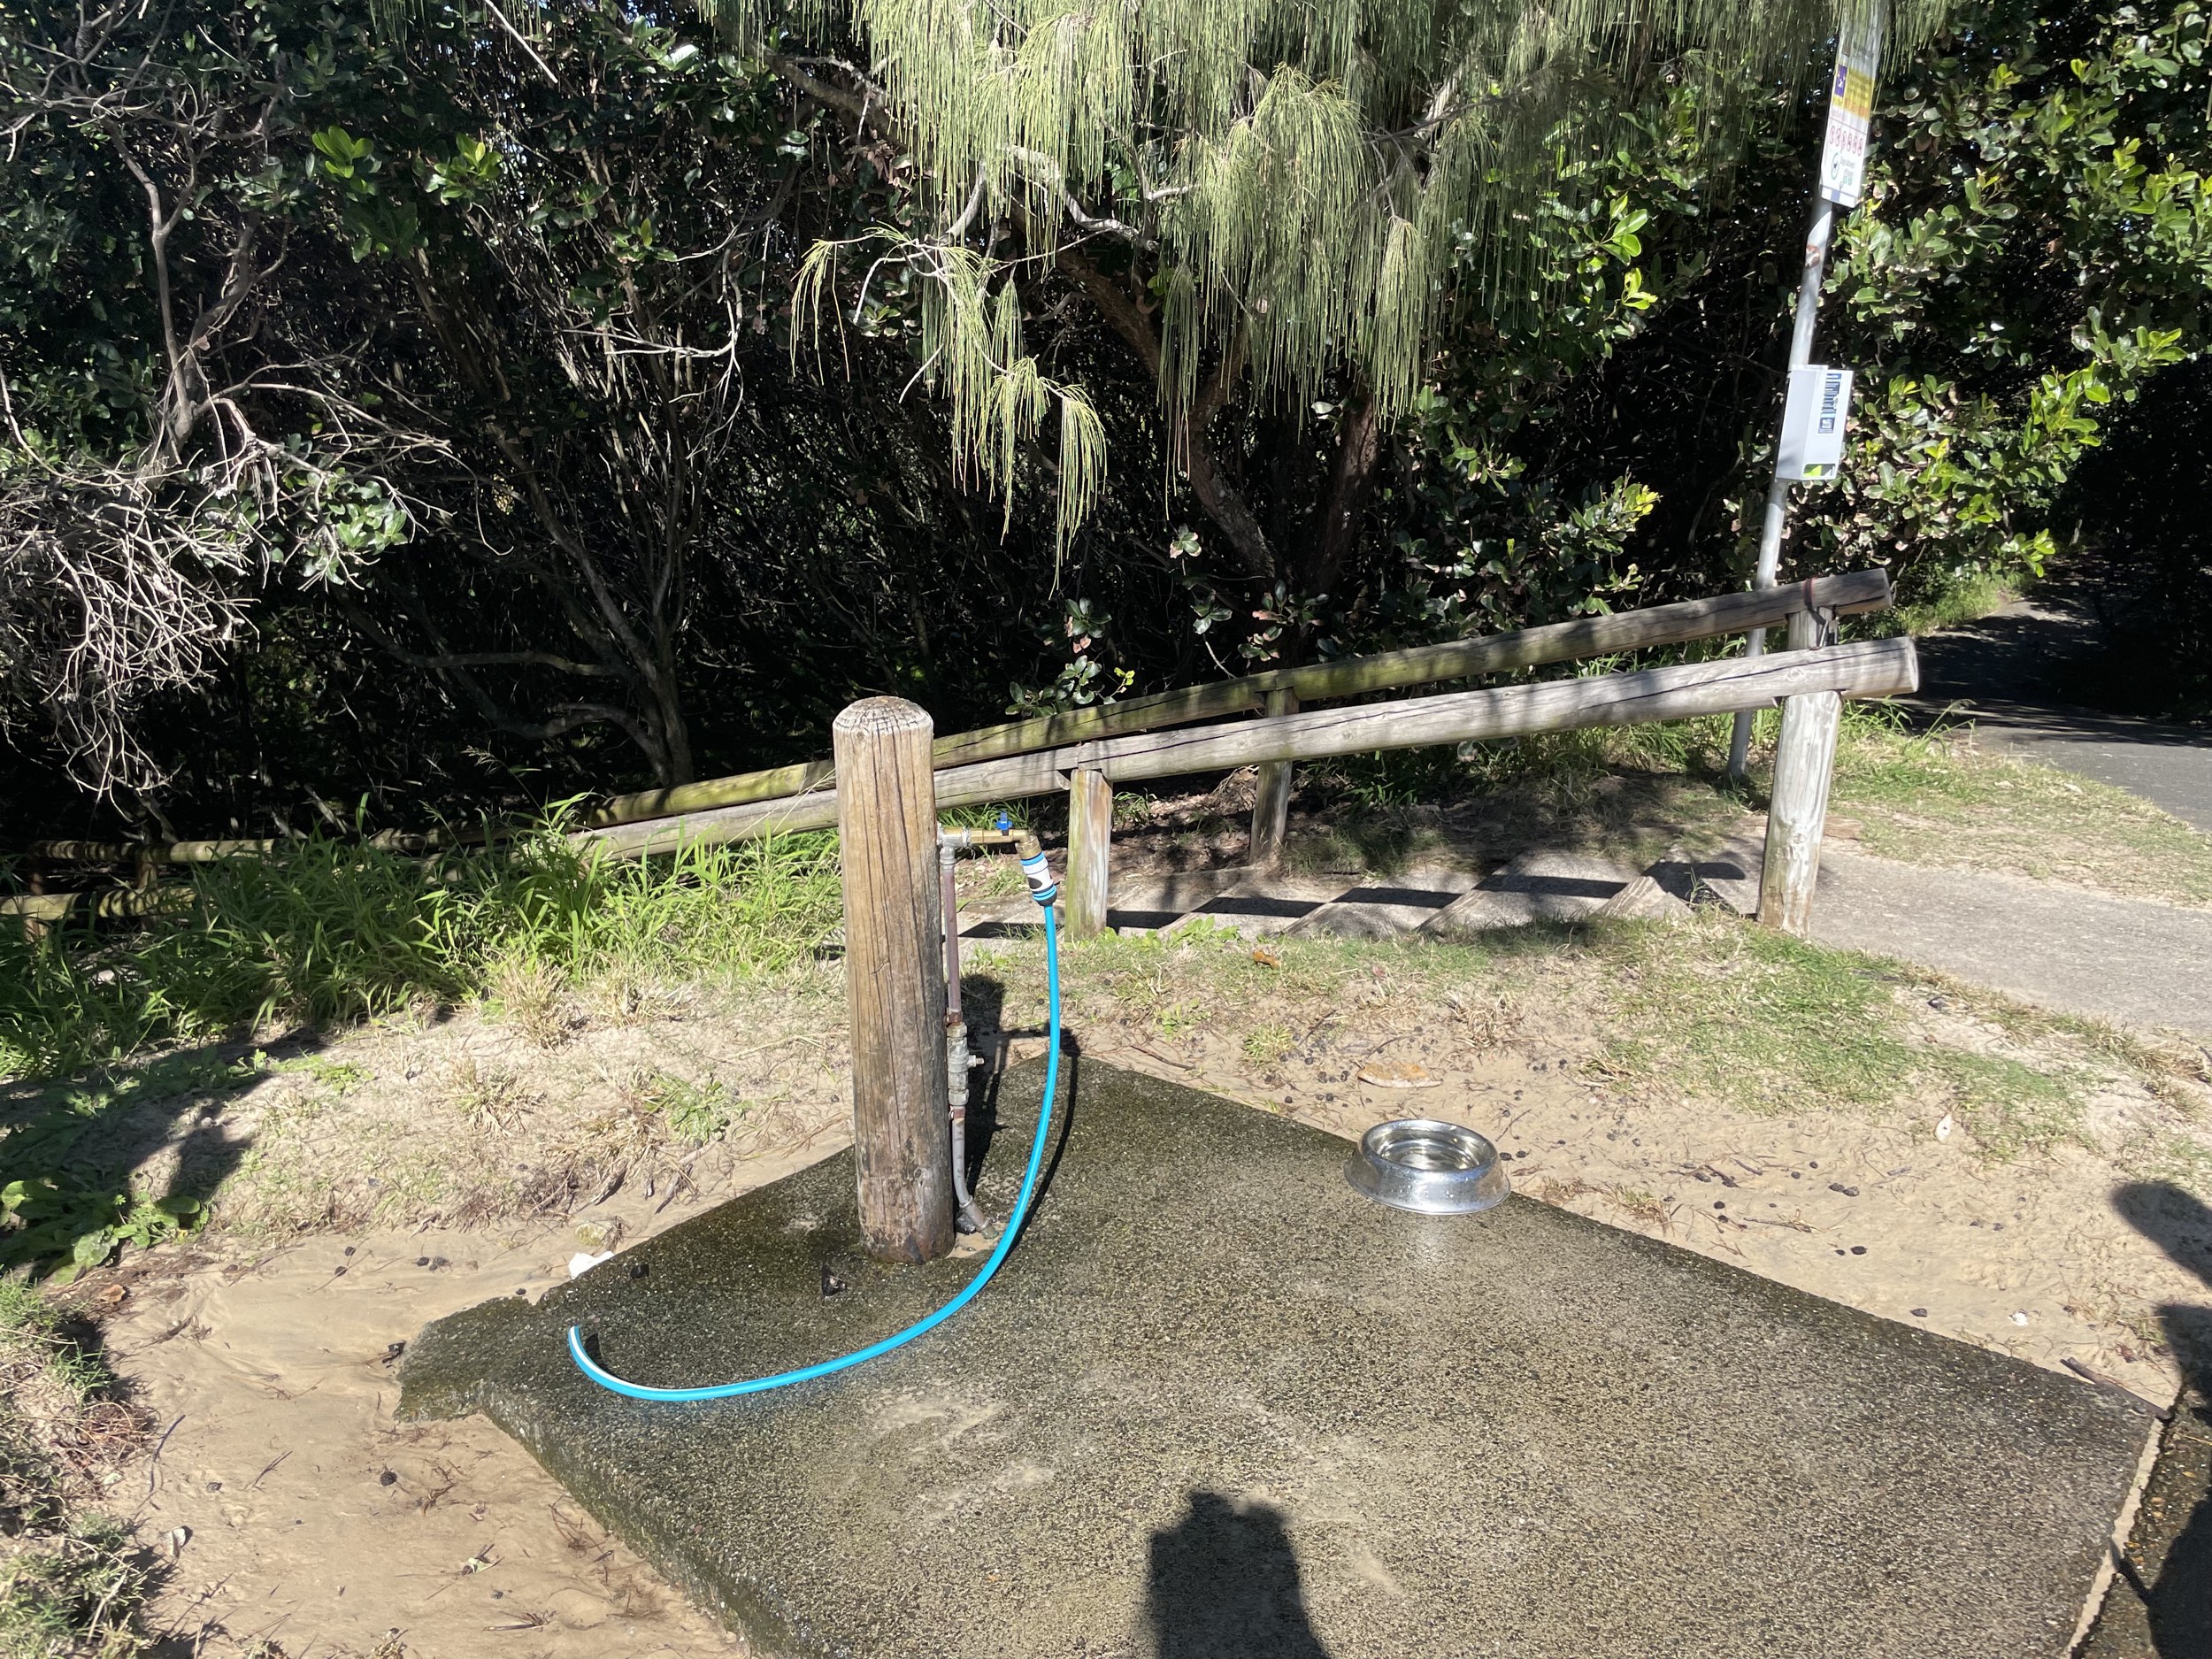 Dog wash area with hose and water bowl for dogs - marcus beach